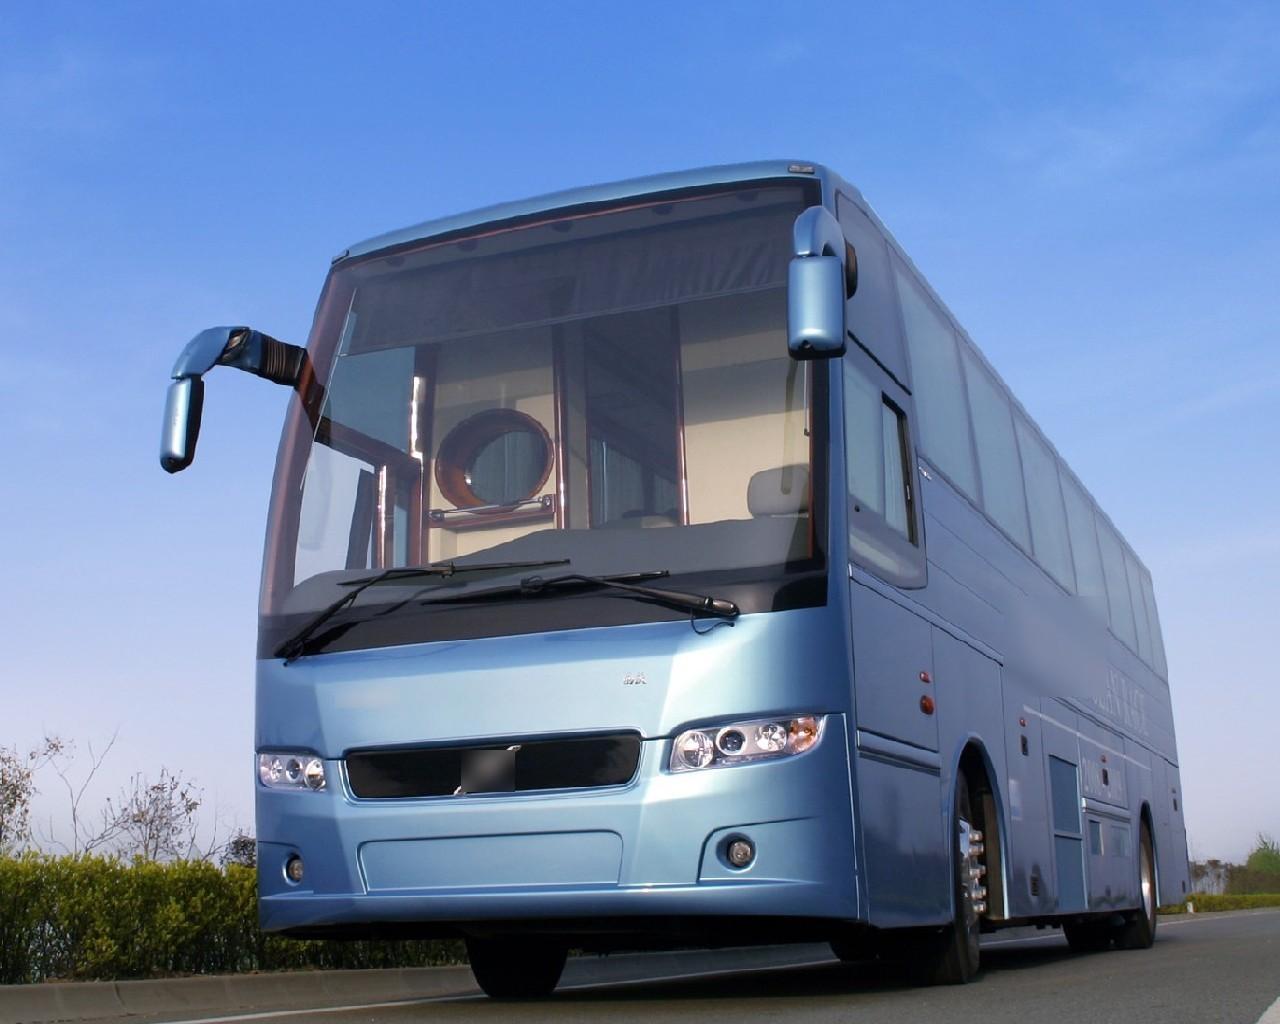 Volvo Bus Price In India 2020 Wallpaper  Volvo Commercial vehicle Bus